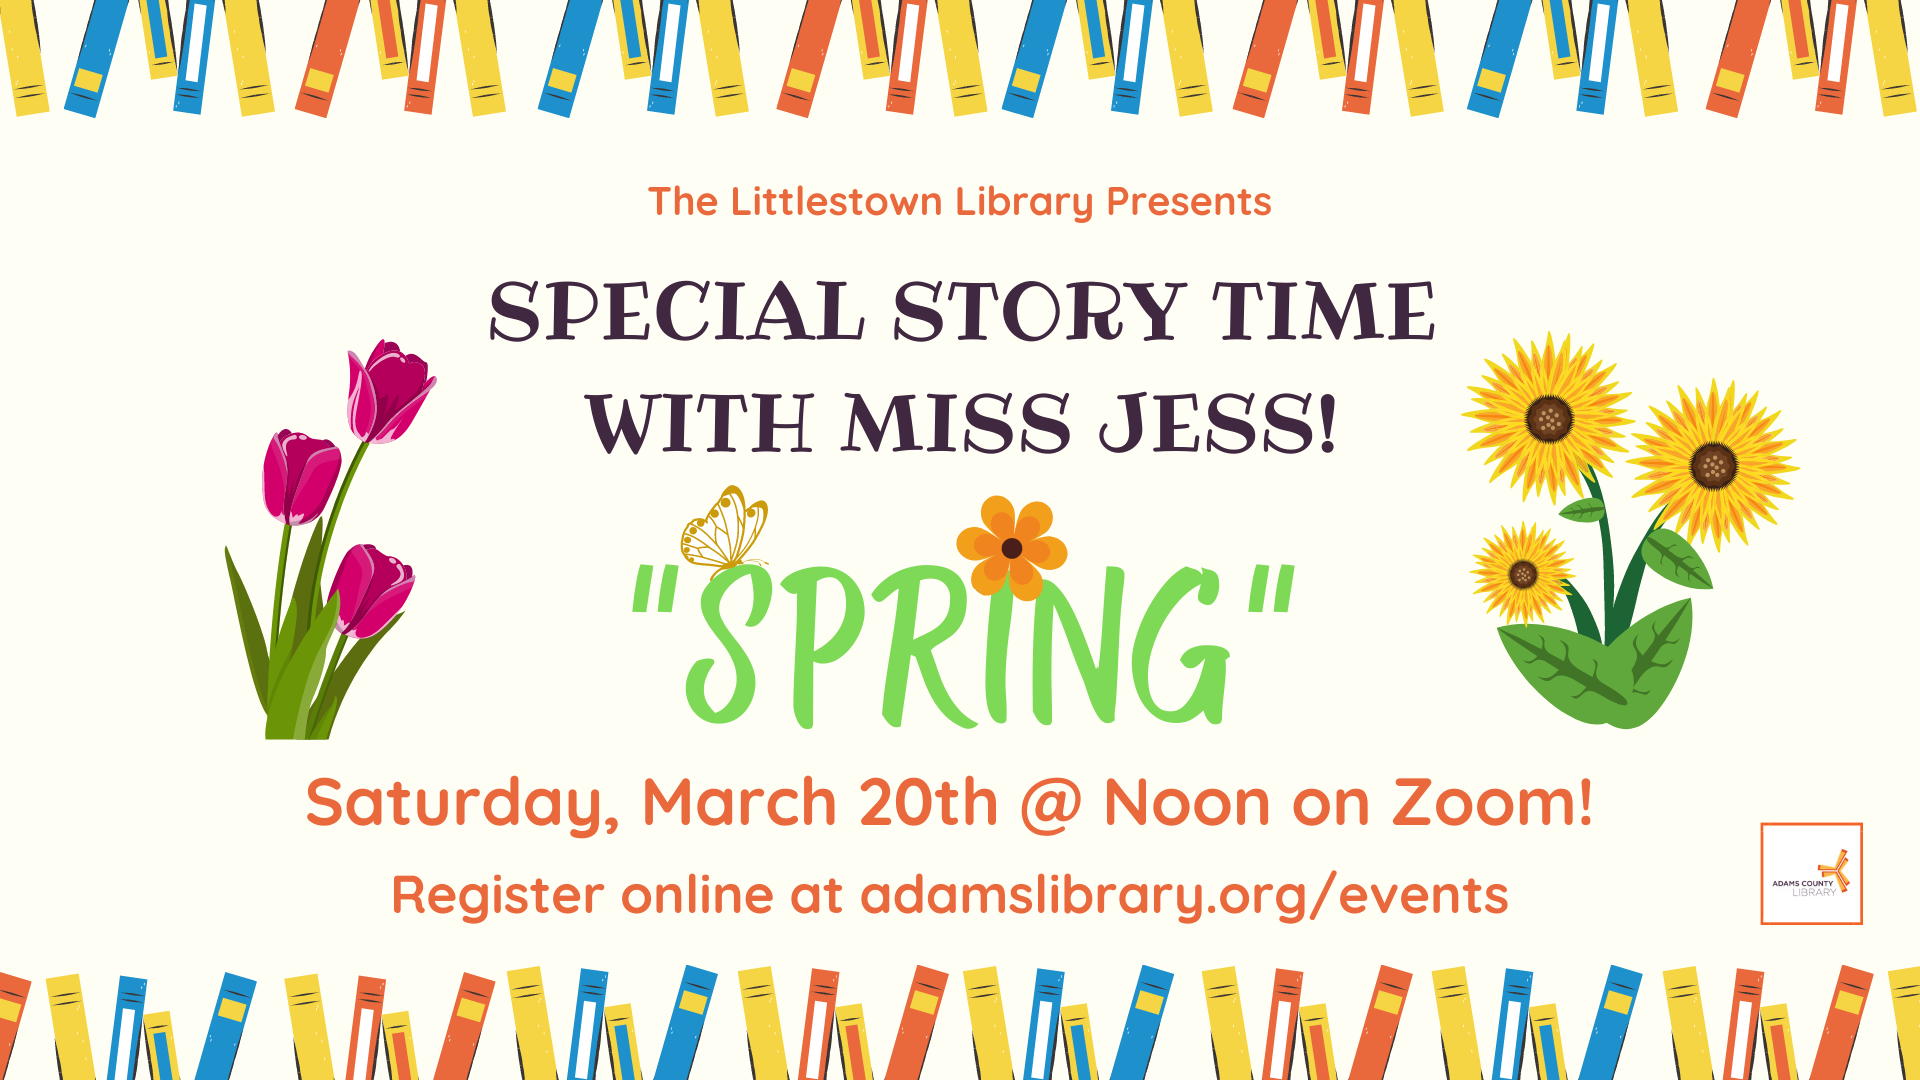 Special Story Time with Miss Jess all about Spring! Join us Saturday, March 20th at Noon on Zoom. Register online at adamslibrary.org/events